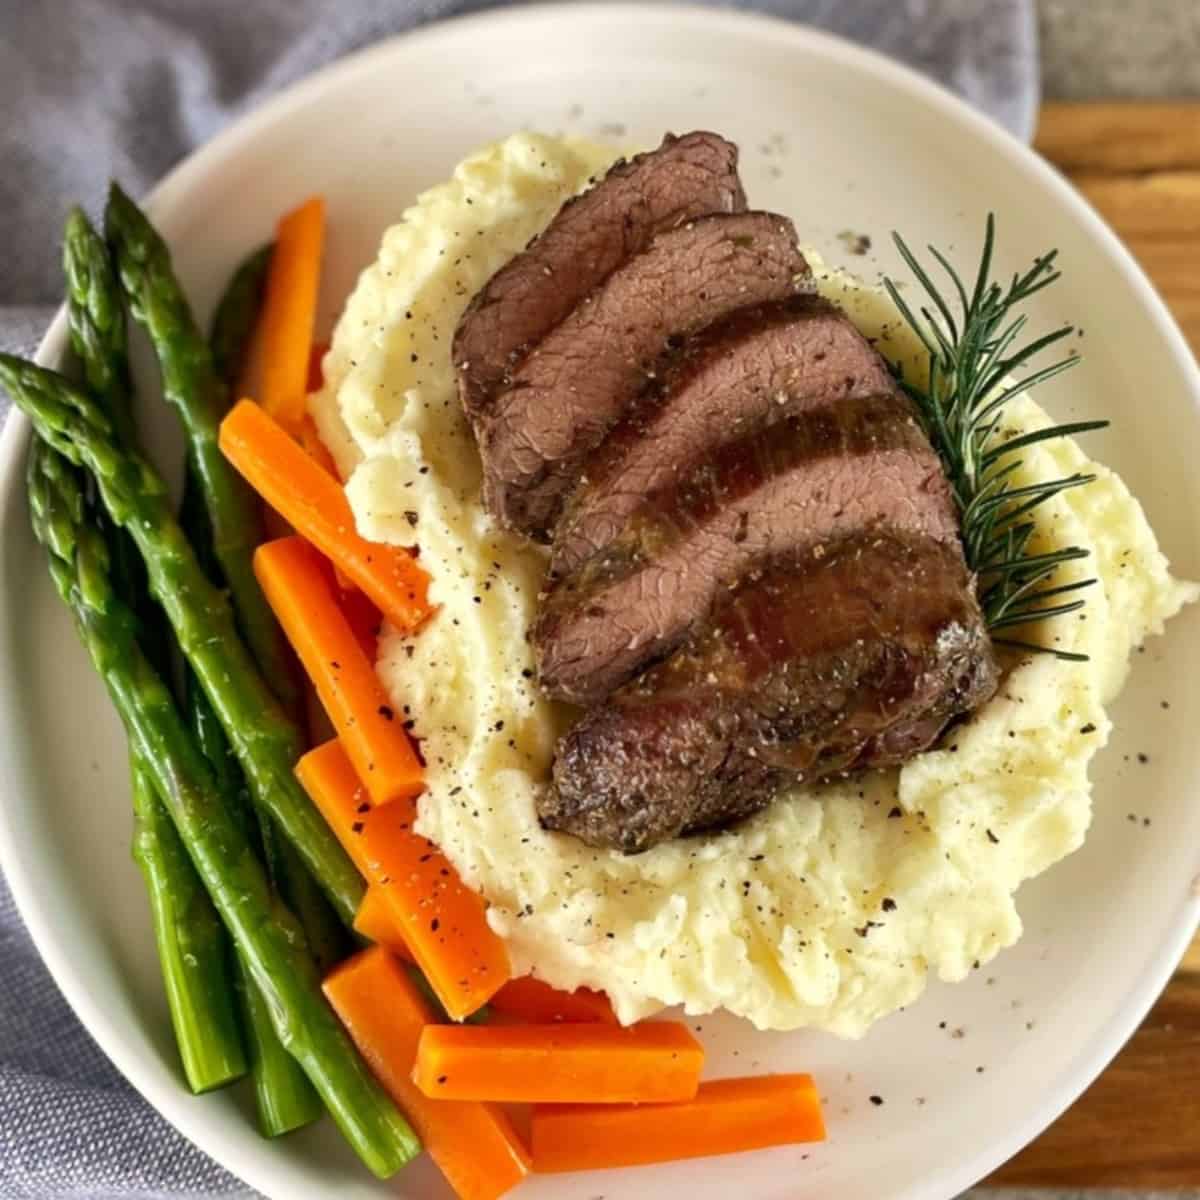 Sliced roast lamb rump sitting on mashed potatoes with asparagus and carrots on the side of the plat